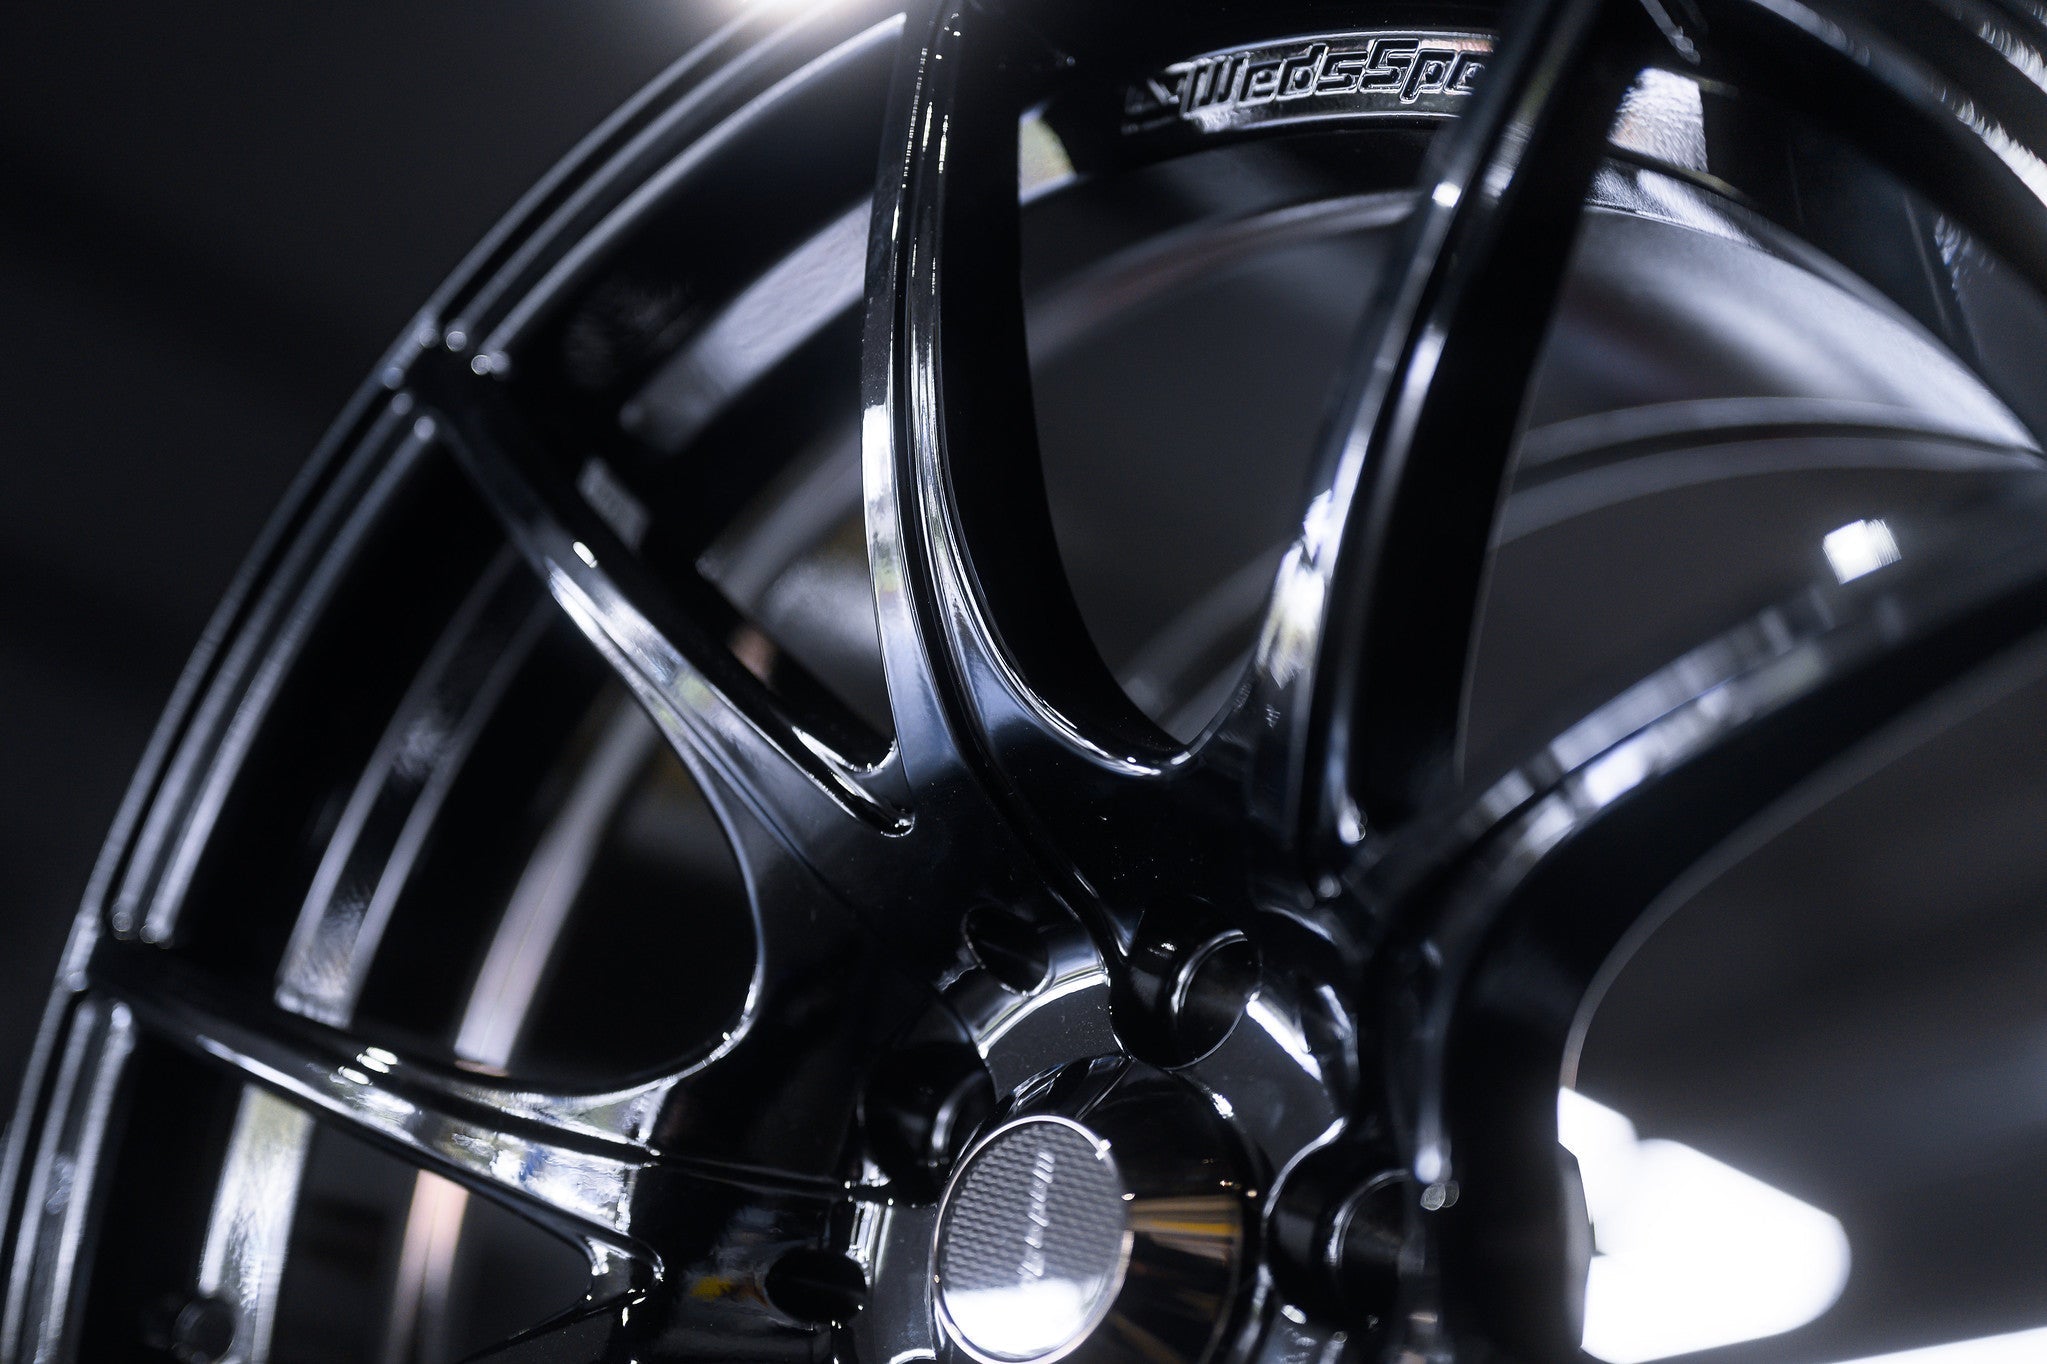 WedsSport SA-25R - Premium Wheels from WedsSport - From just $2249.0! Shop now at MK MOTORSPORTS